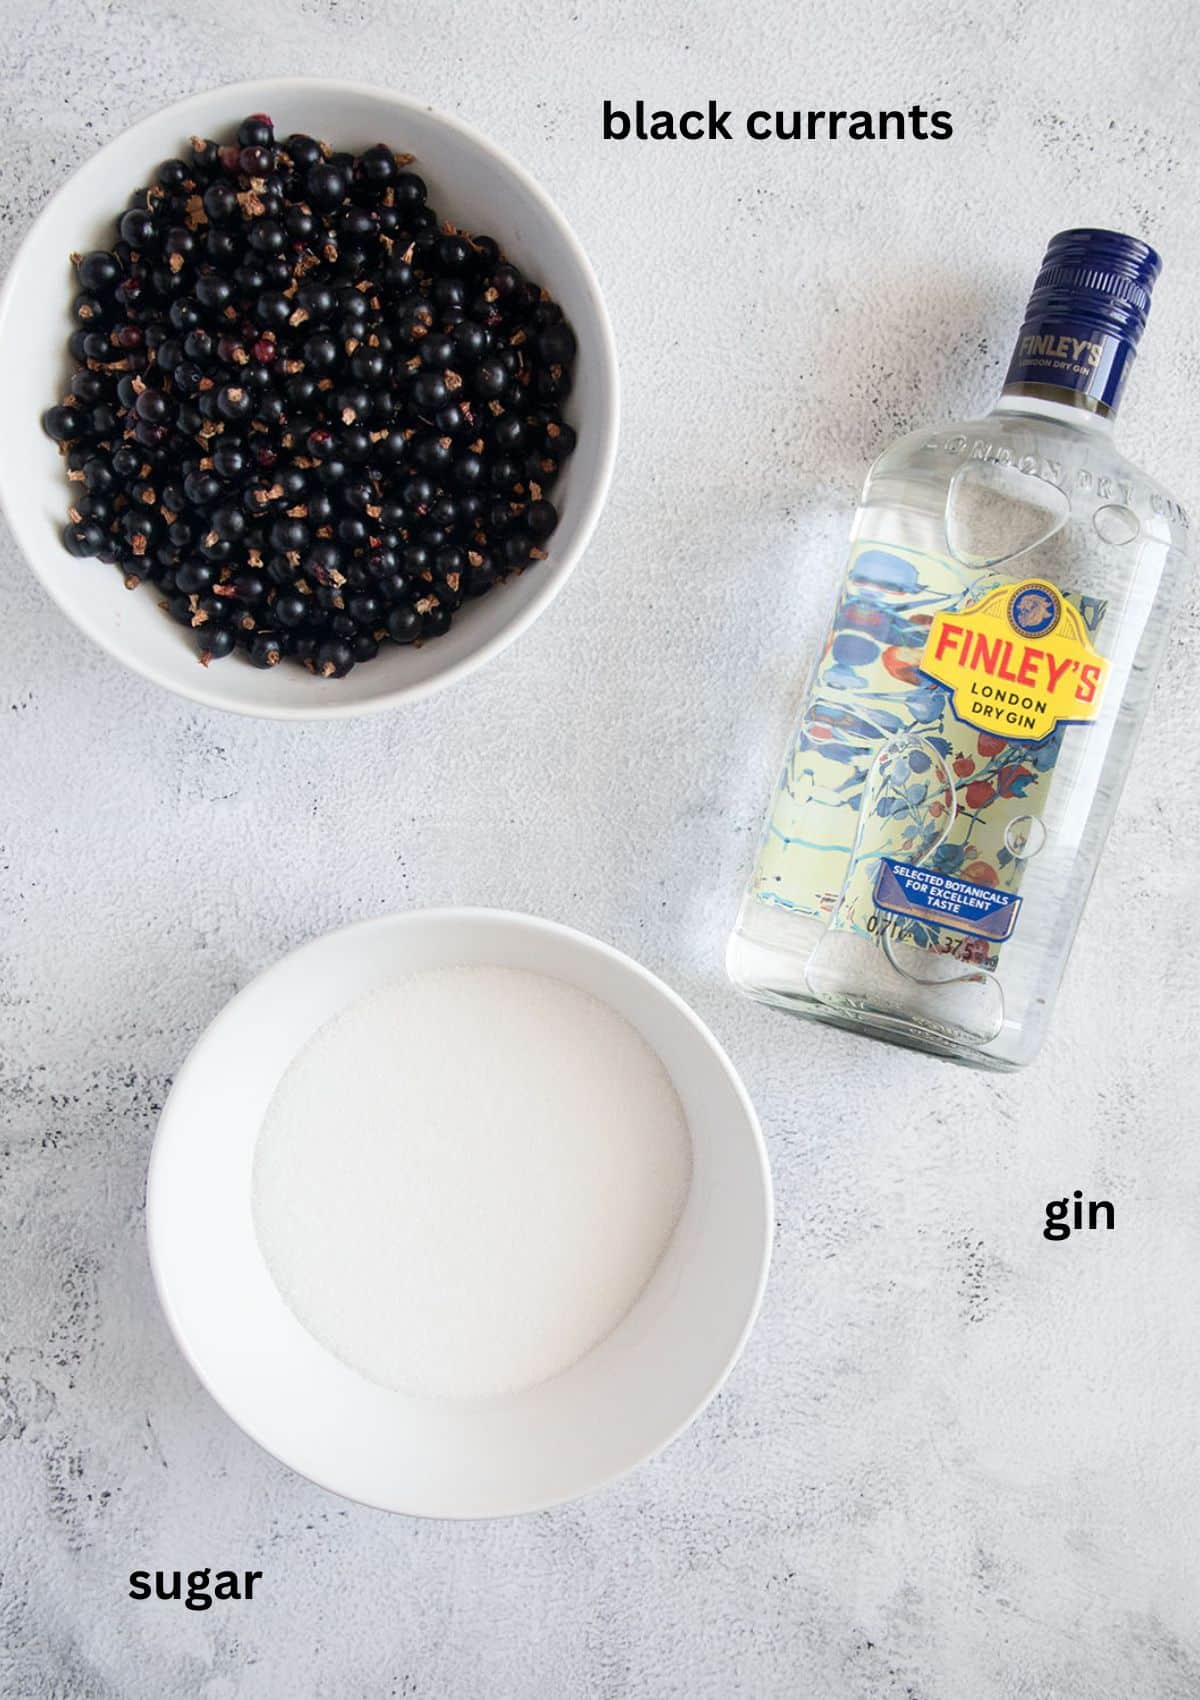 bowls with black currants and sugar and a bottle of gin.